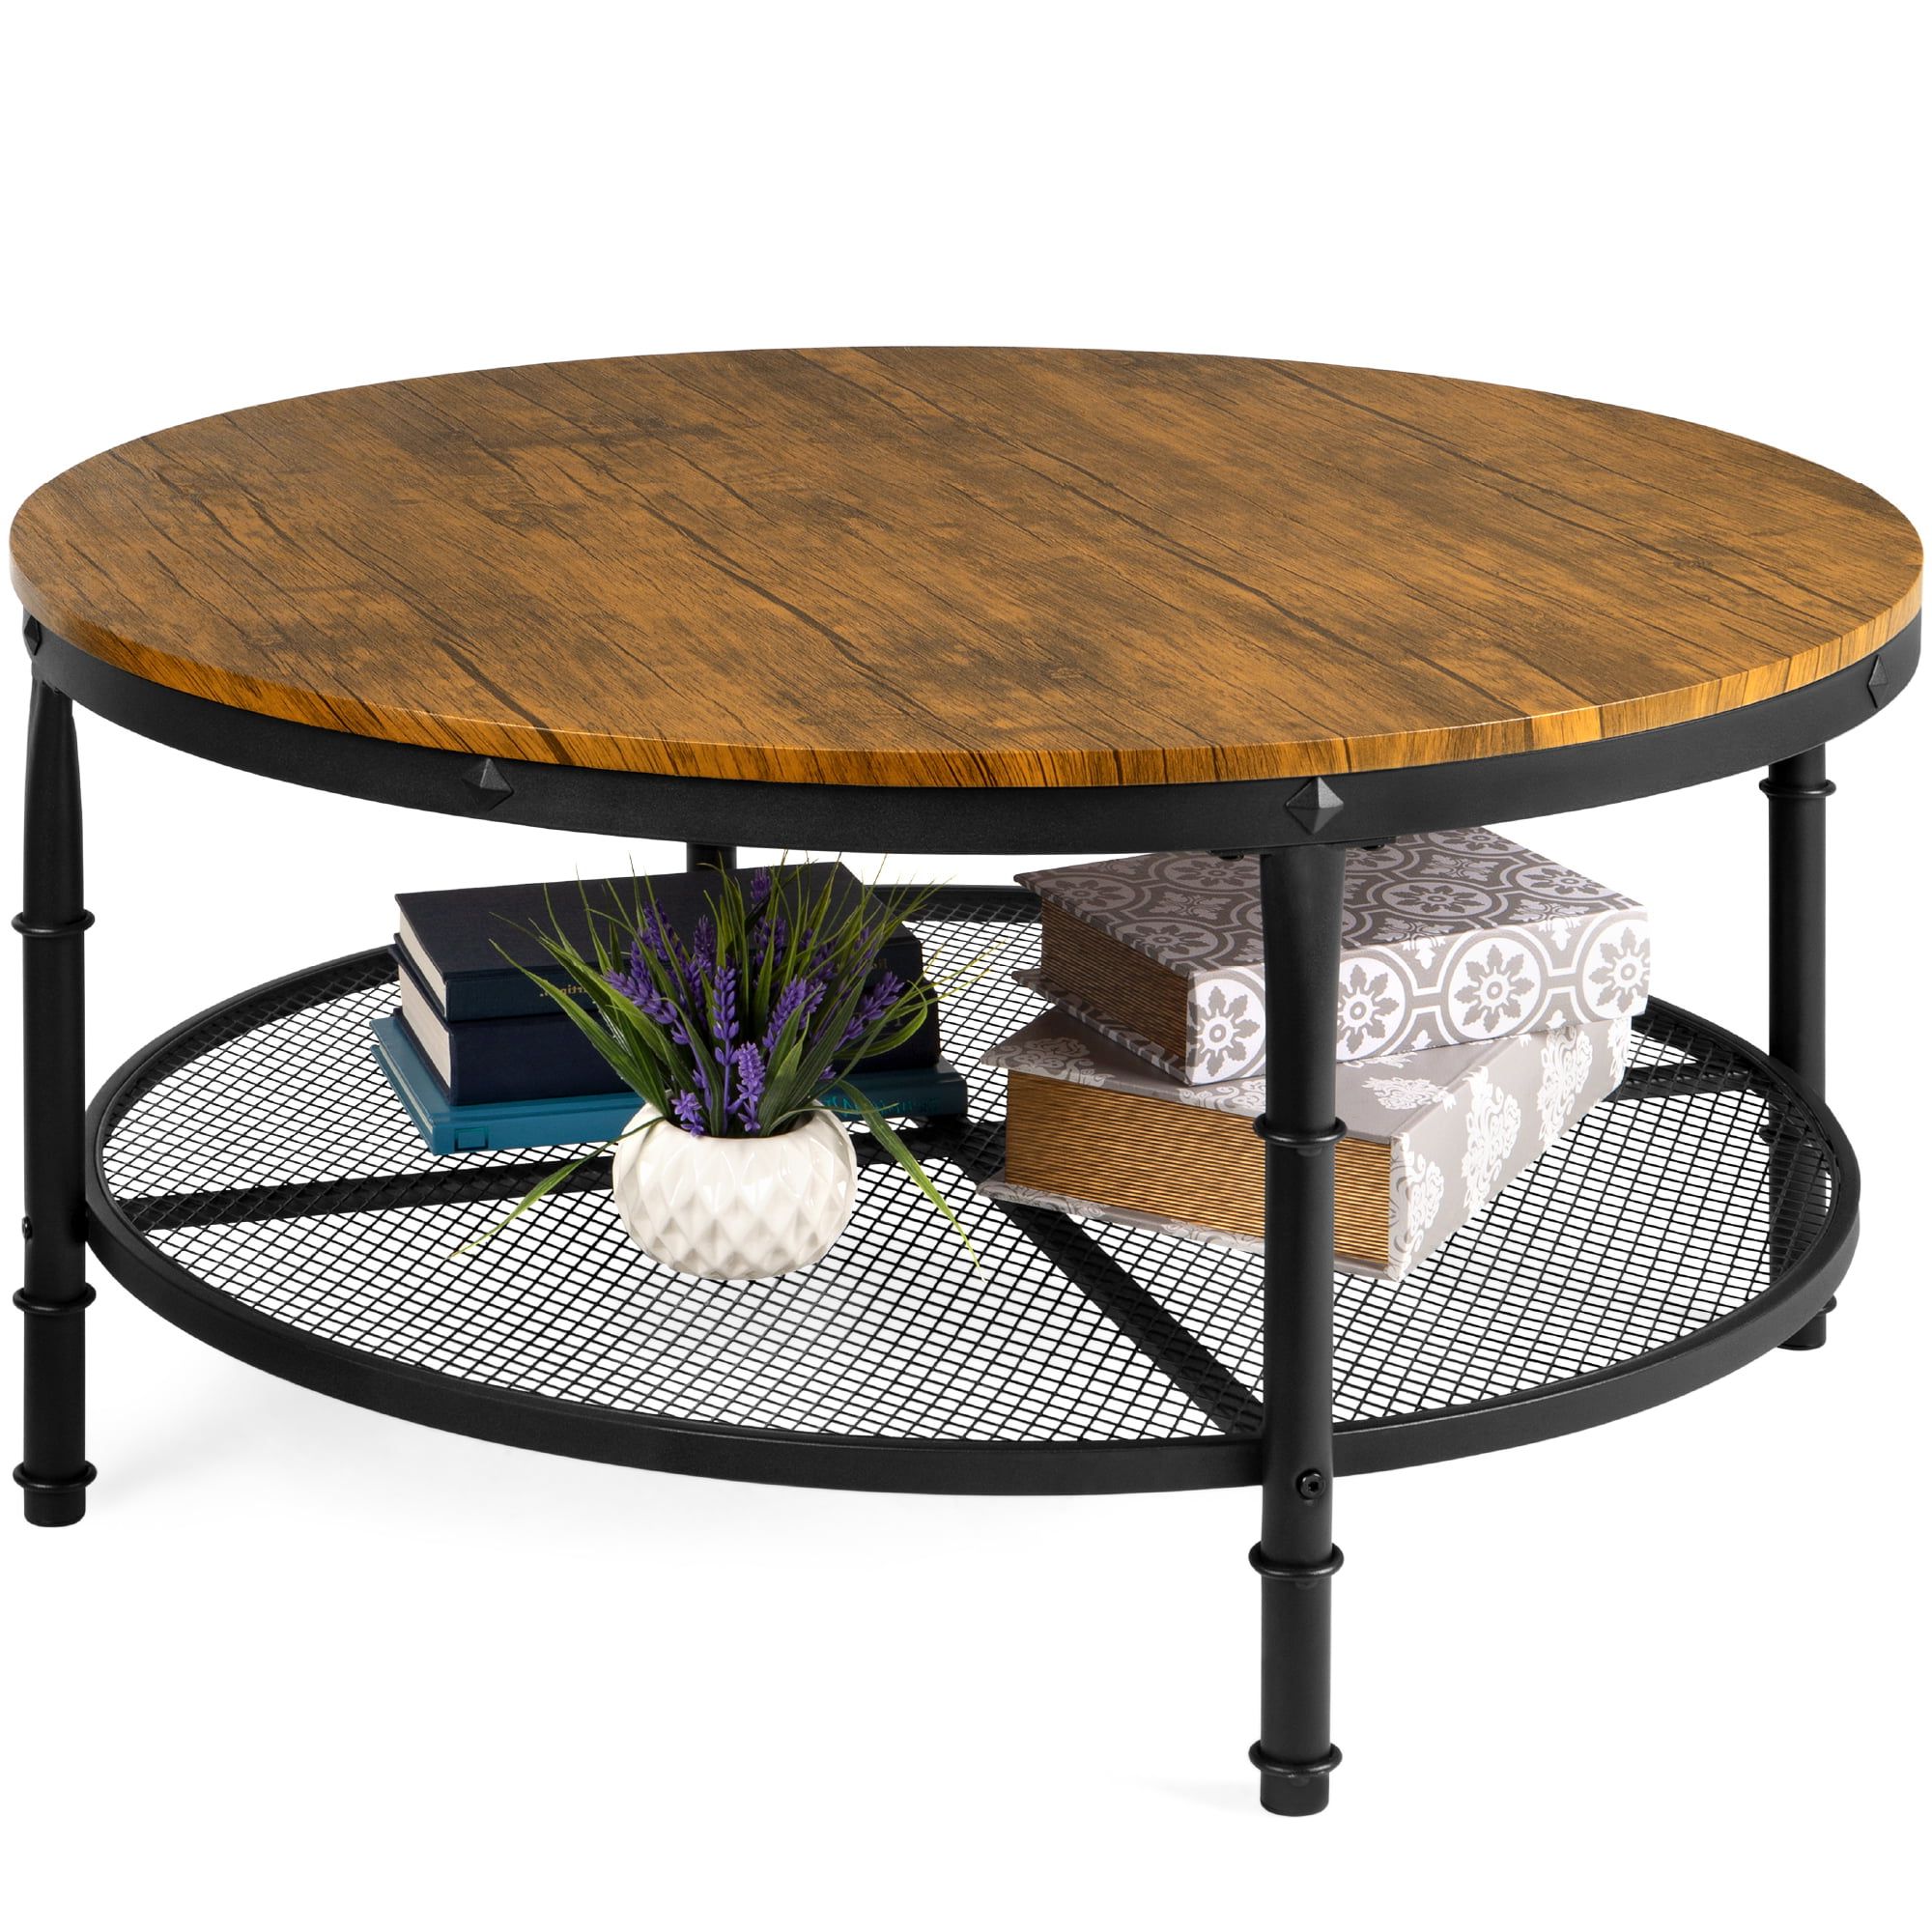 Best Choice Products 2 Tier Round Coffee Table, Rustic Steel Accent For Outdoor Half Round Coffee Tables (View 14 of 20)